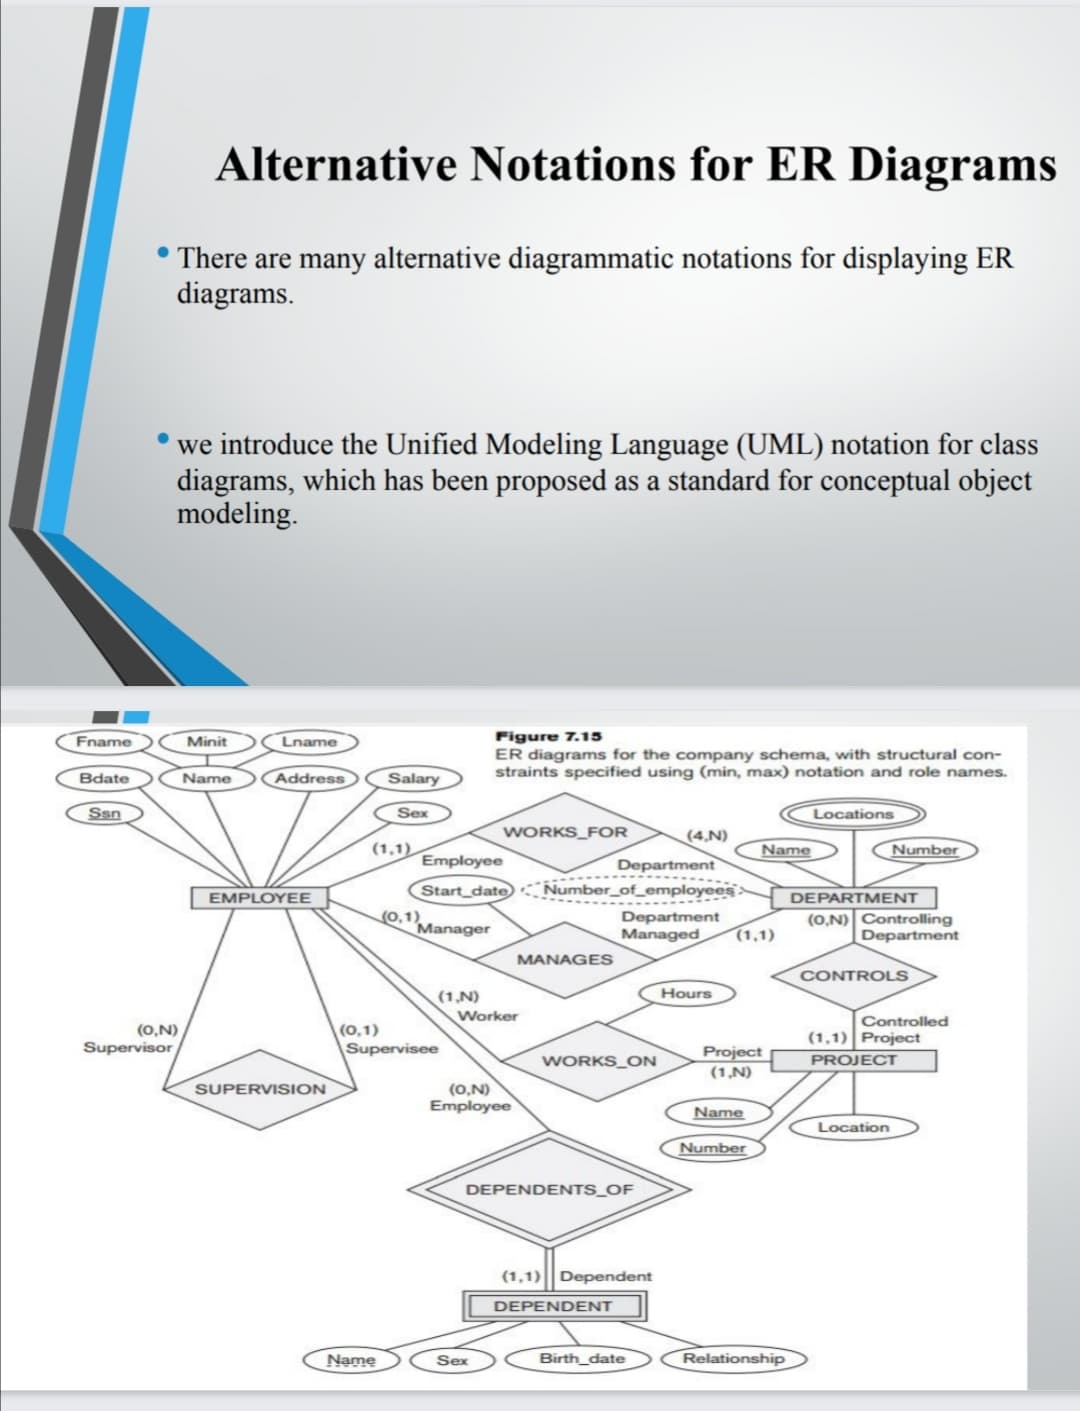 Alternative Notations for ER Diagrams
• There are many alternative diagrammatic notations for displaying ER
diagrams.
we introduce the Unified Modeling Language (UML) notation for class
diagrams, which has been proposed as a standard for conceptual object
modeling.
Figure 7.15
ER diagrams for the company schema, with structural con-
straints specified using (min, max) notation and role names.
Fname
Minit
Lname
Bdate
Name
Address
Salary
Ssn
Sex
Locations
WORKS_FOR
(4,N)
(1,1)
Employee
Number
Name
Department
Start_date Number_of_employees
EMPLOYEE
DEPARTMENT
Department
Managed
(0,1)
Manager
(0,N) Controlling
Department
(1,1)
MANAGES
CONTROLS
Hours
(1,N)
Worker
Controlled
(0,N)
Supervisor
(0,1)
Supervisee
(1,1) Project
Project
(1,N)
WORKS_ON
PROJECT
SUPERVISION
(0,N)
Employee
Name
Location
Number
DEPENDENTS_OF
(1,1) || Dependent
DEPEND ENT
Name
Sex
Birth_date
Relationship
